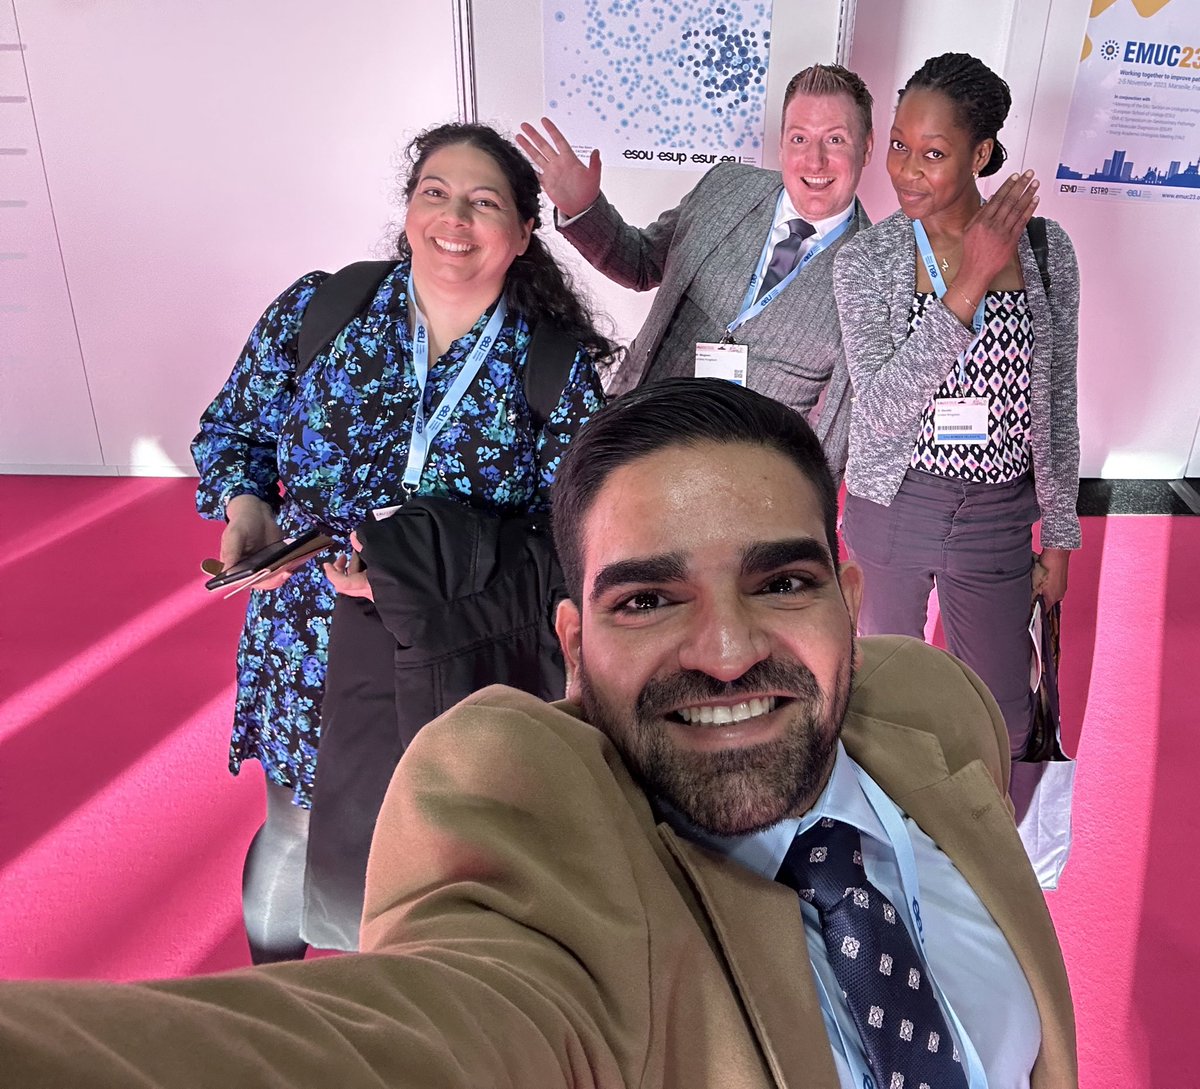 My #EAU23 journey is ending. It was wonderful seeing both current and past fellows from @uclh, my current and precious Consultants, and importantly friends from all over the world. See everyone at #AUA23 or next year in Paris #EAU24